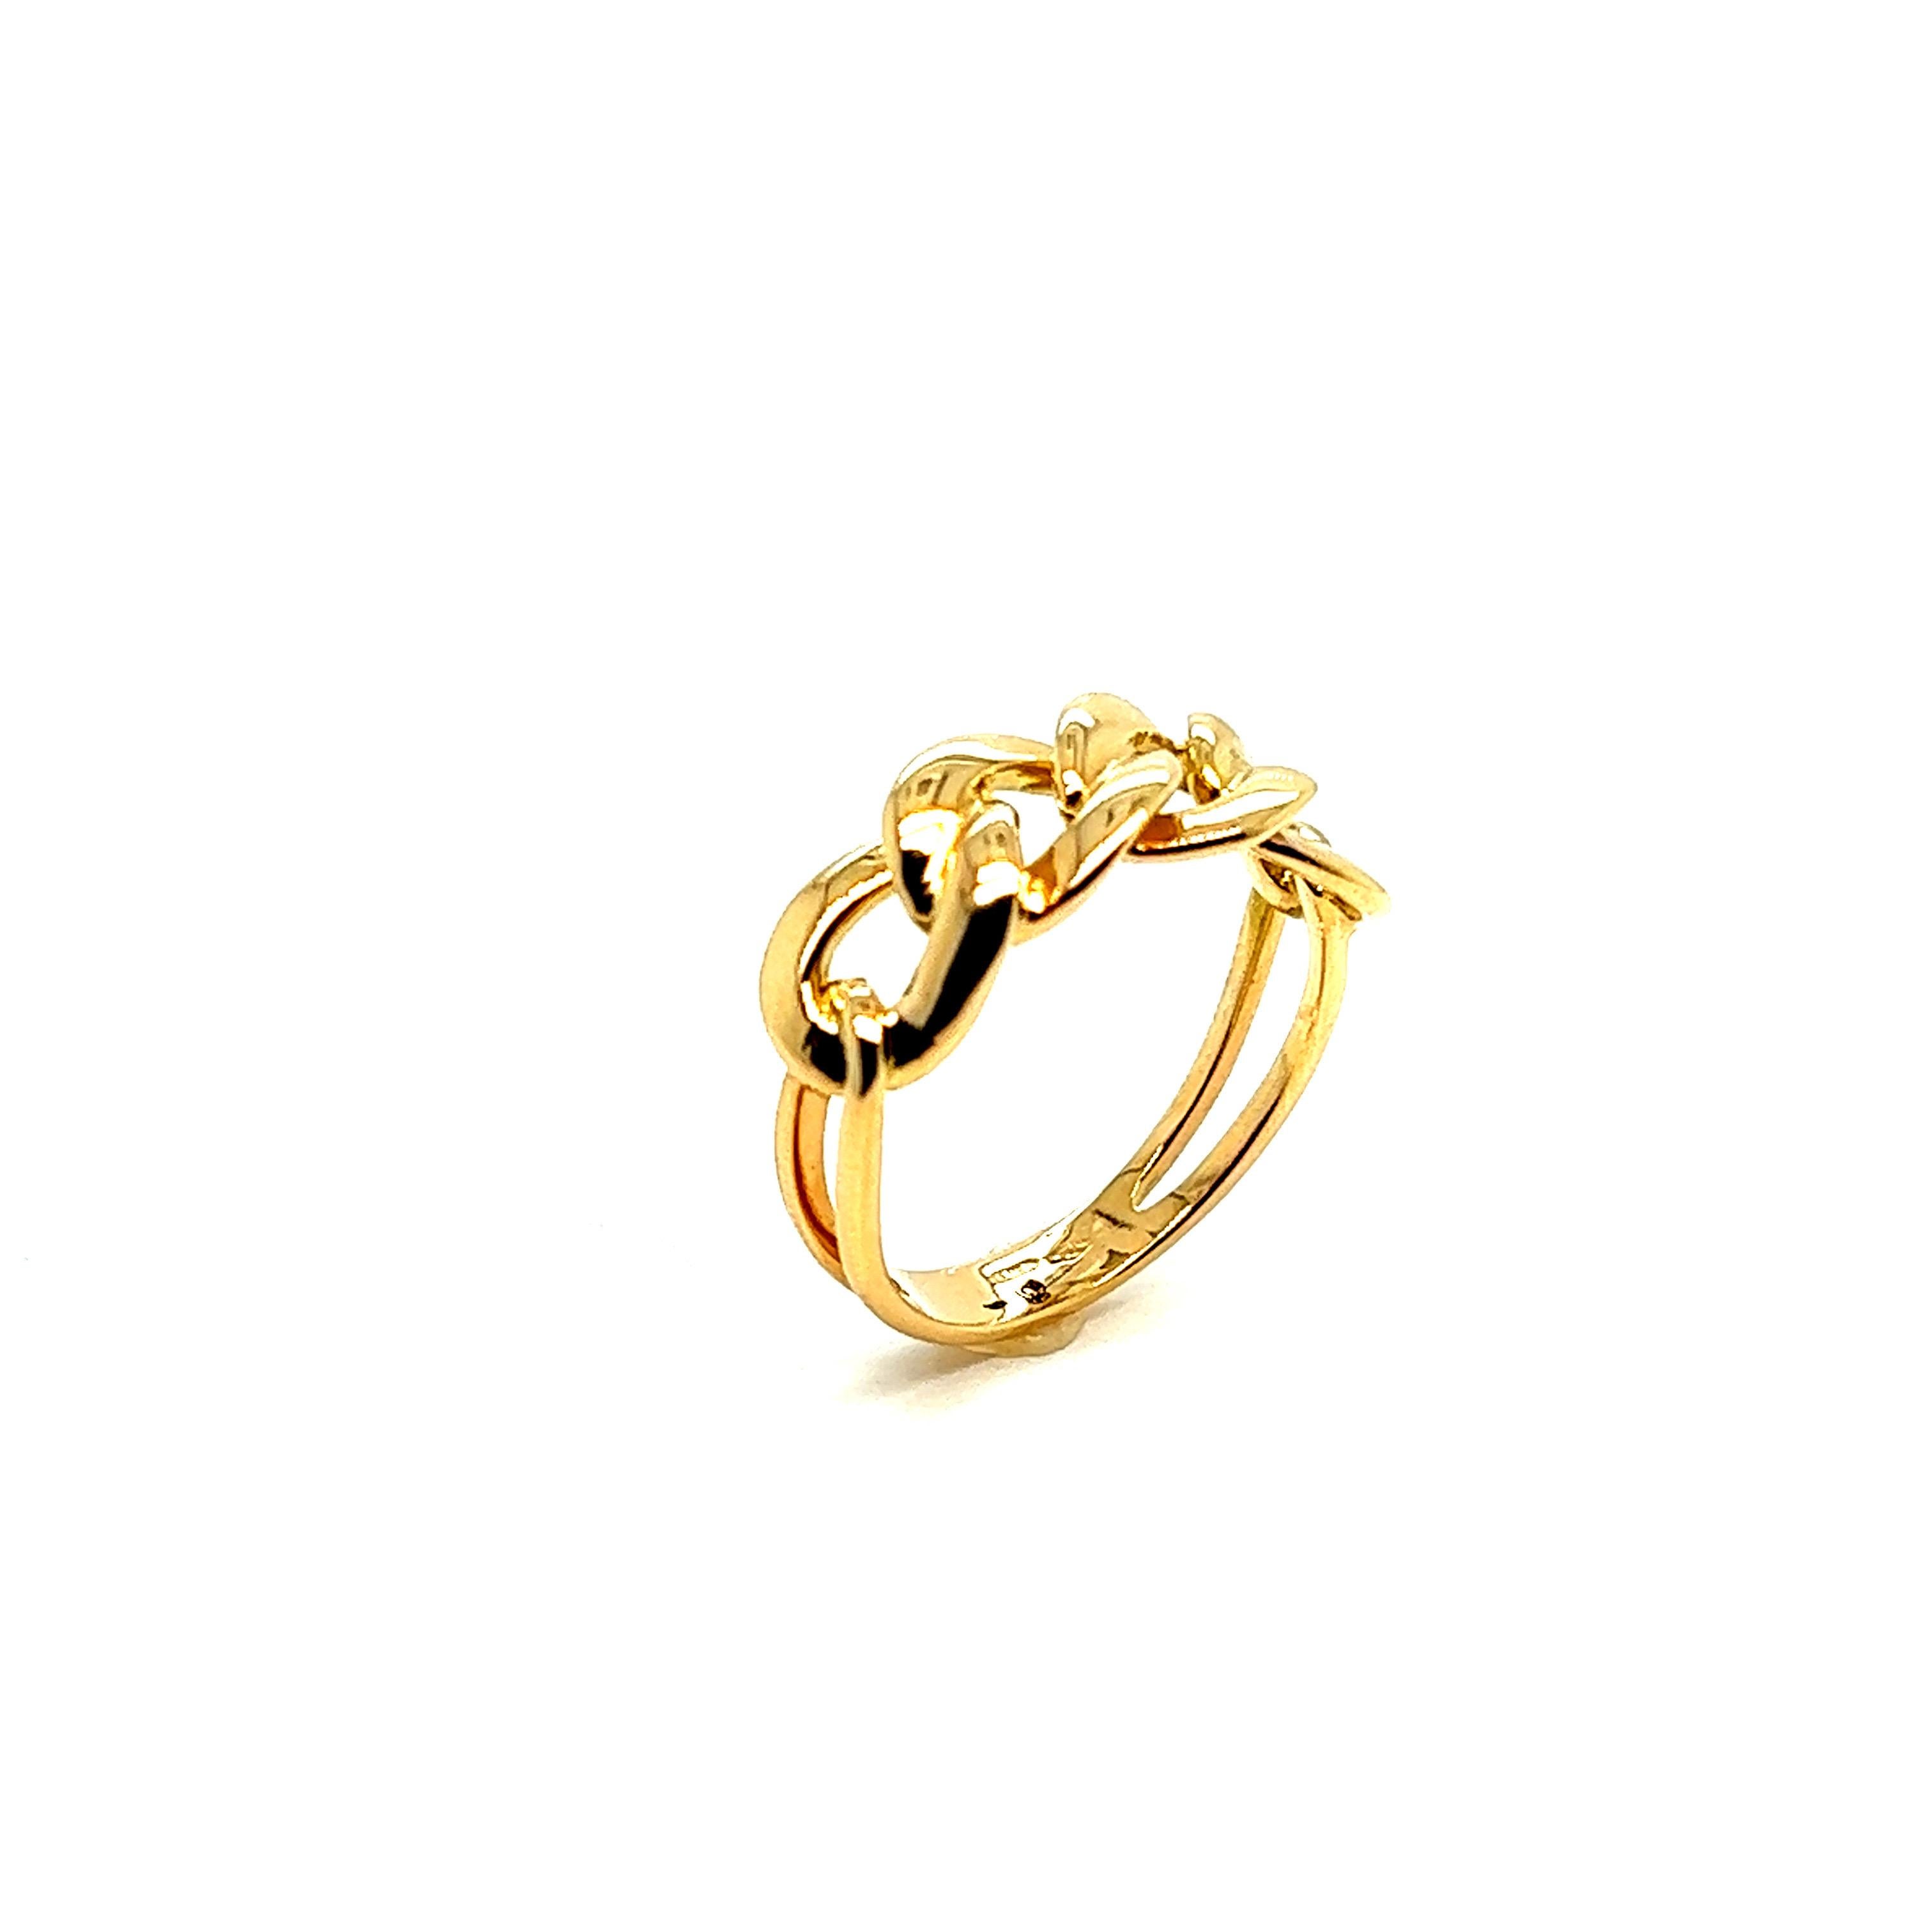 Modern French Ring 4 Small Braided Rings Yellow Gold 18 Karat For Sale